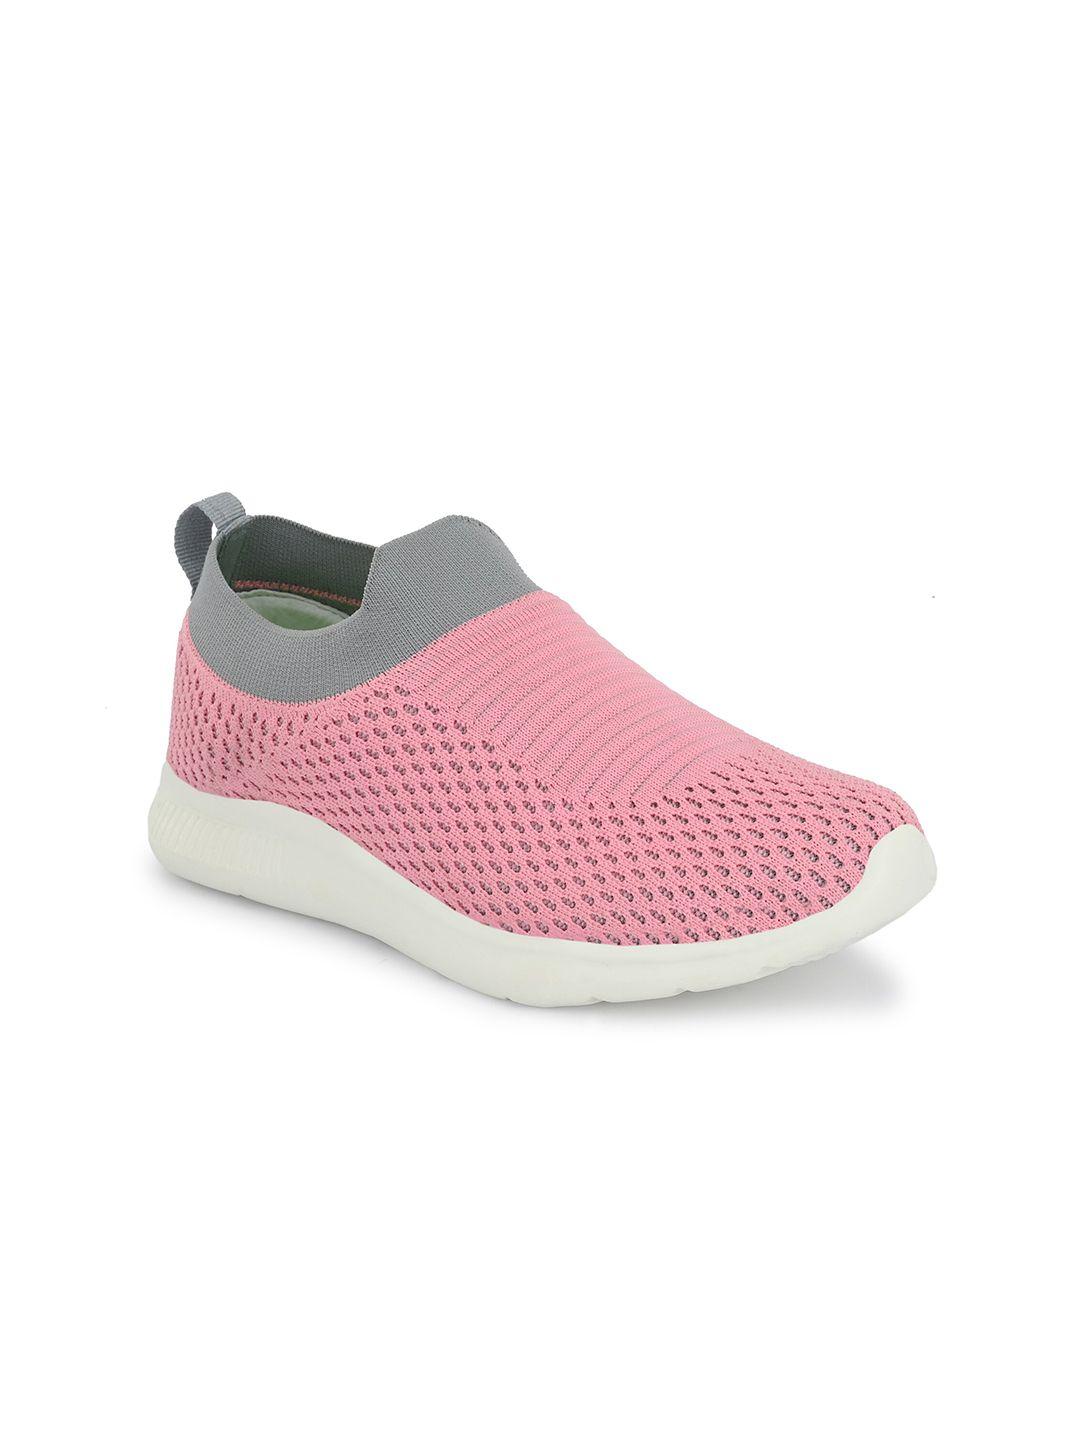 off limits women mesh mid top non-marking slip on walking shoes